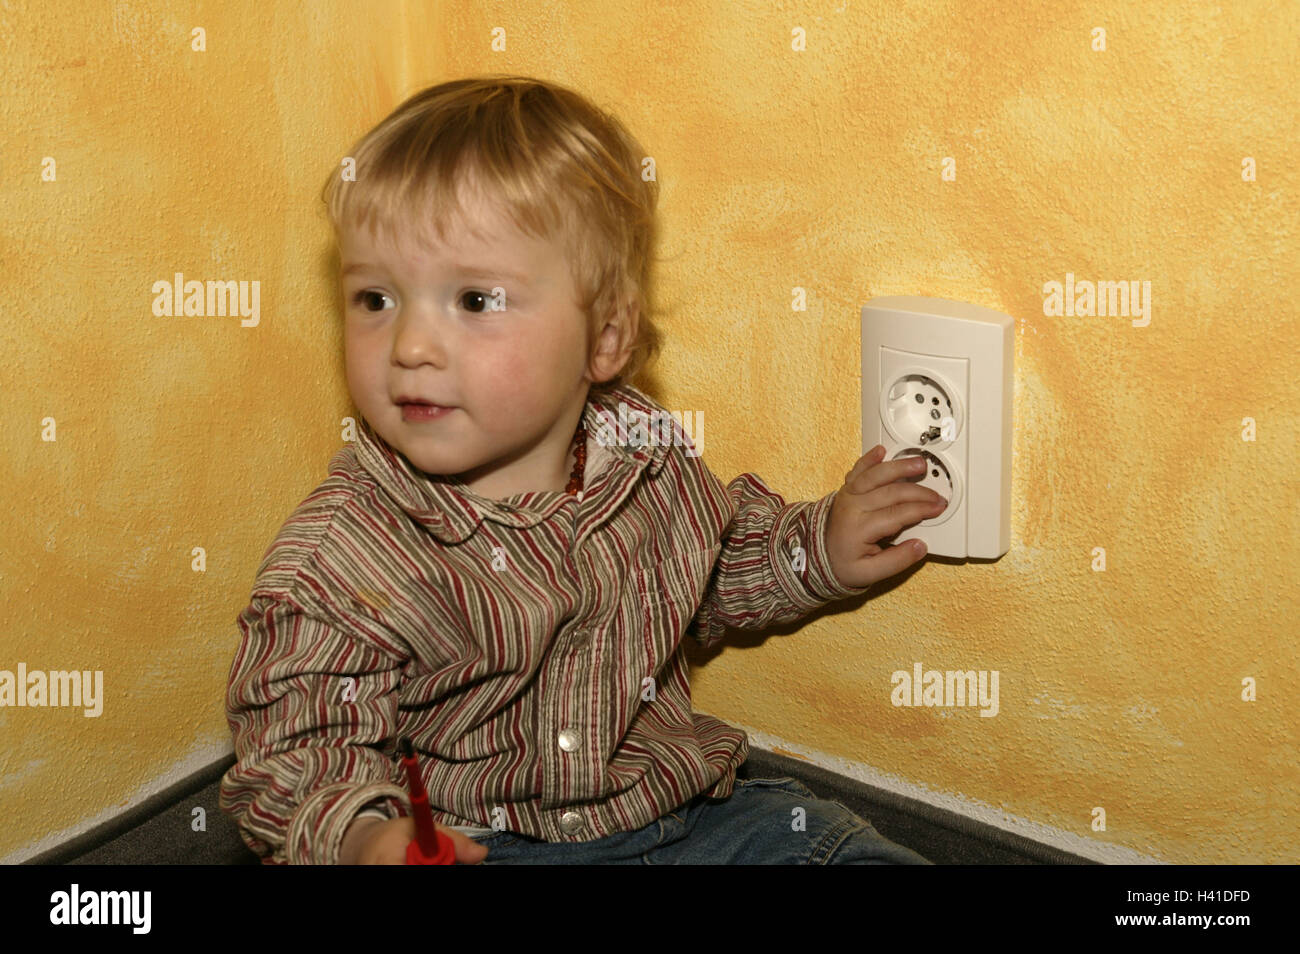 Infant, play, socket, mortal danger danger, accident, danger collision, tools, current, shunt, activity, experiment, electric shock, backup, care, household, obligatory supervision, unattended, child, boy, 1 - 2 years, floor, sit, inside, child security, Stock Photo